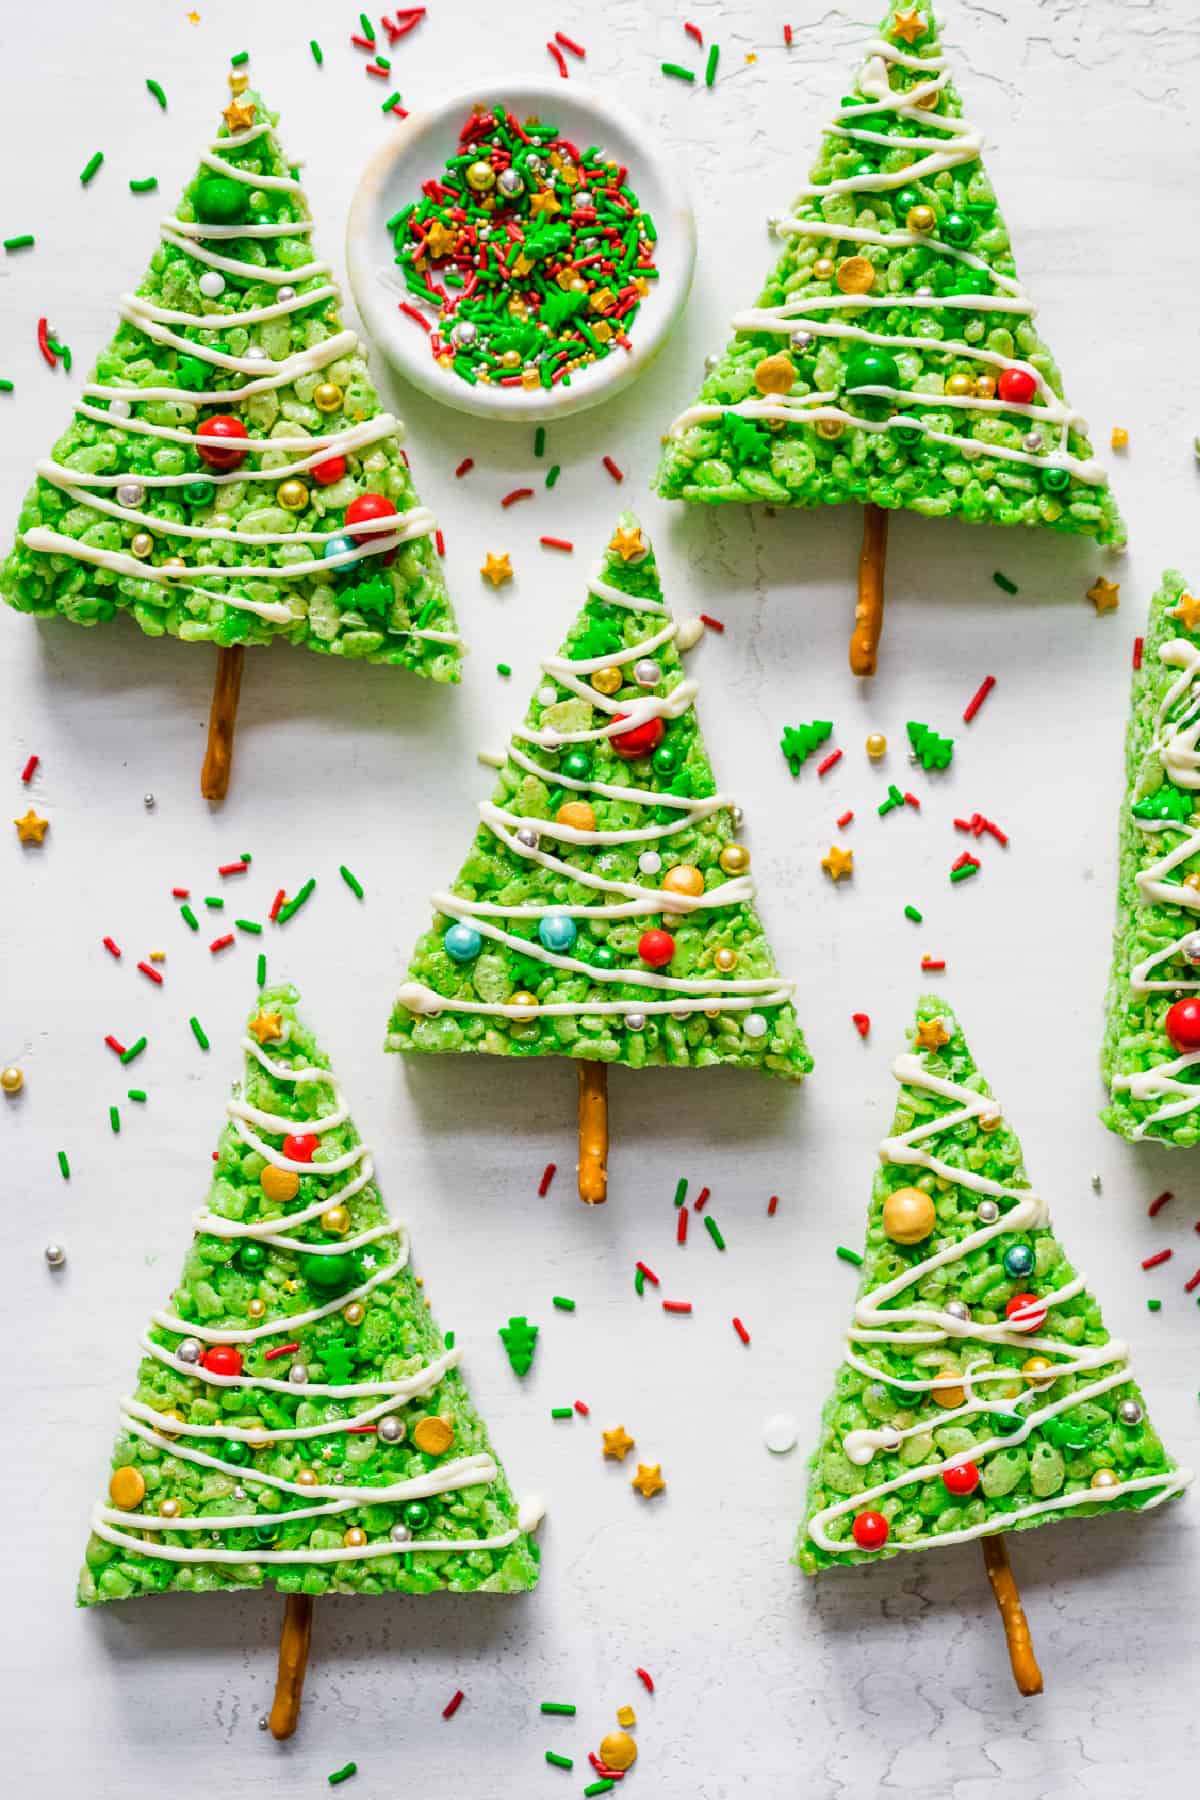 Green rice krispie treats shaped land decorated like Christmas trees with sprinkles on a counter from overhead.